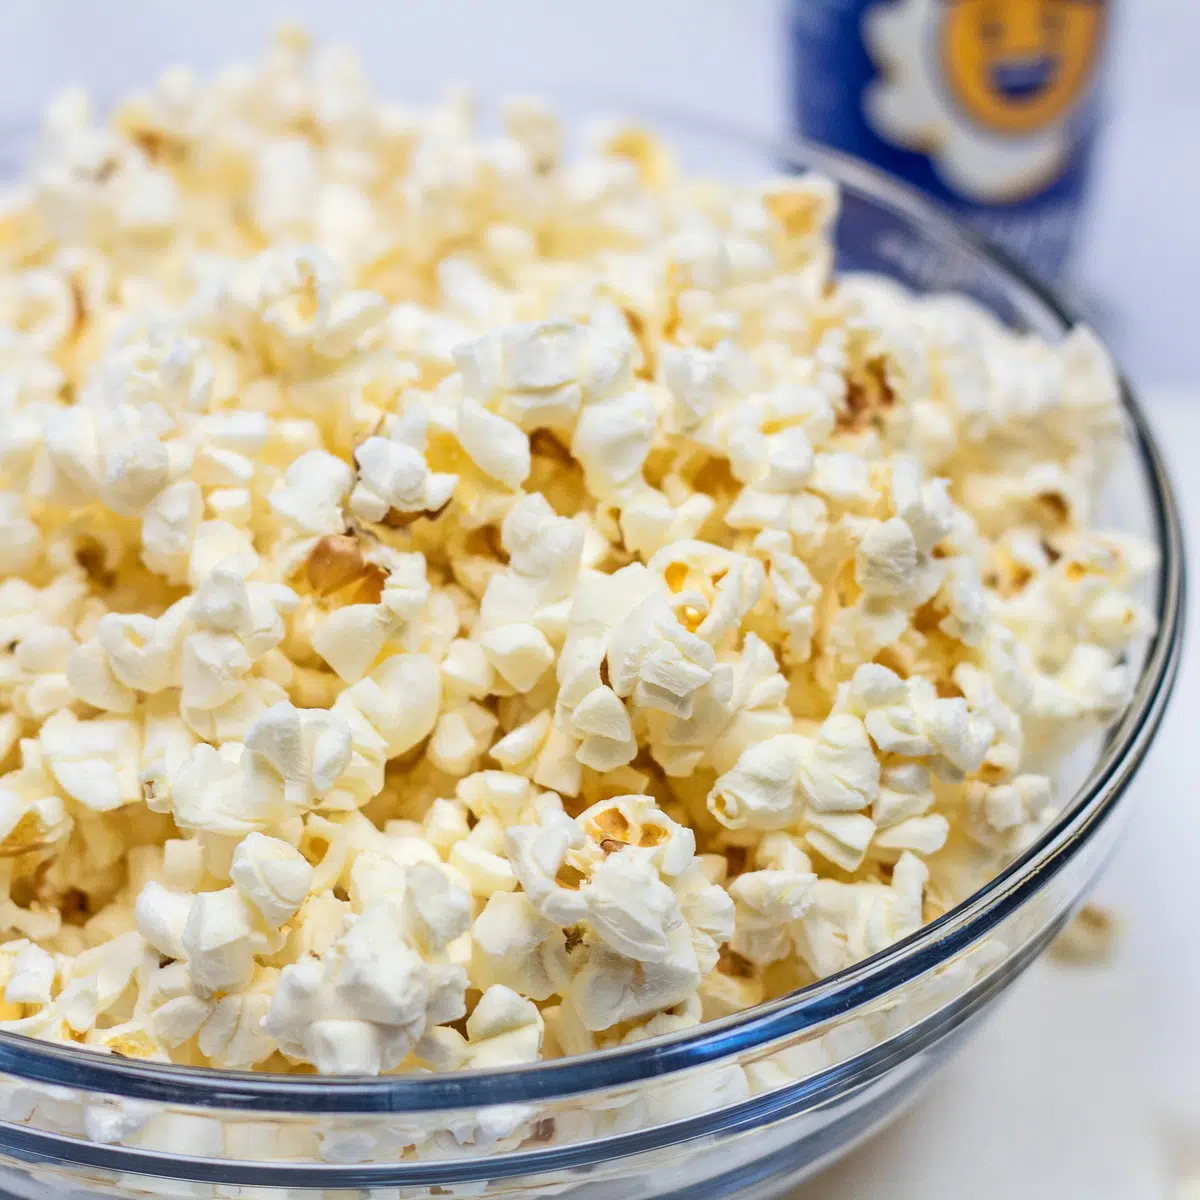 Tender, tasty microwave popcorn pops up beautifully like this bowl shown here.